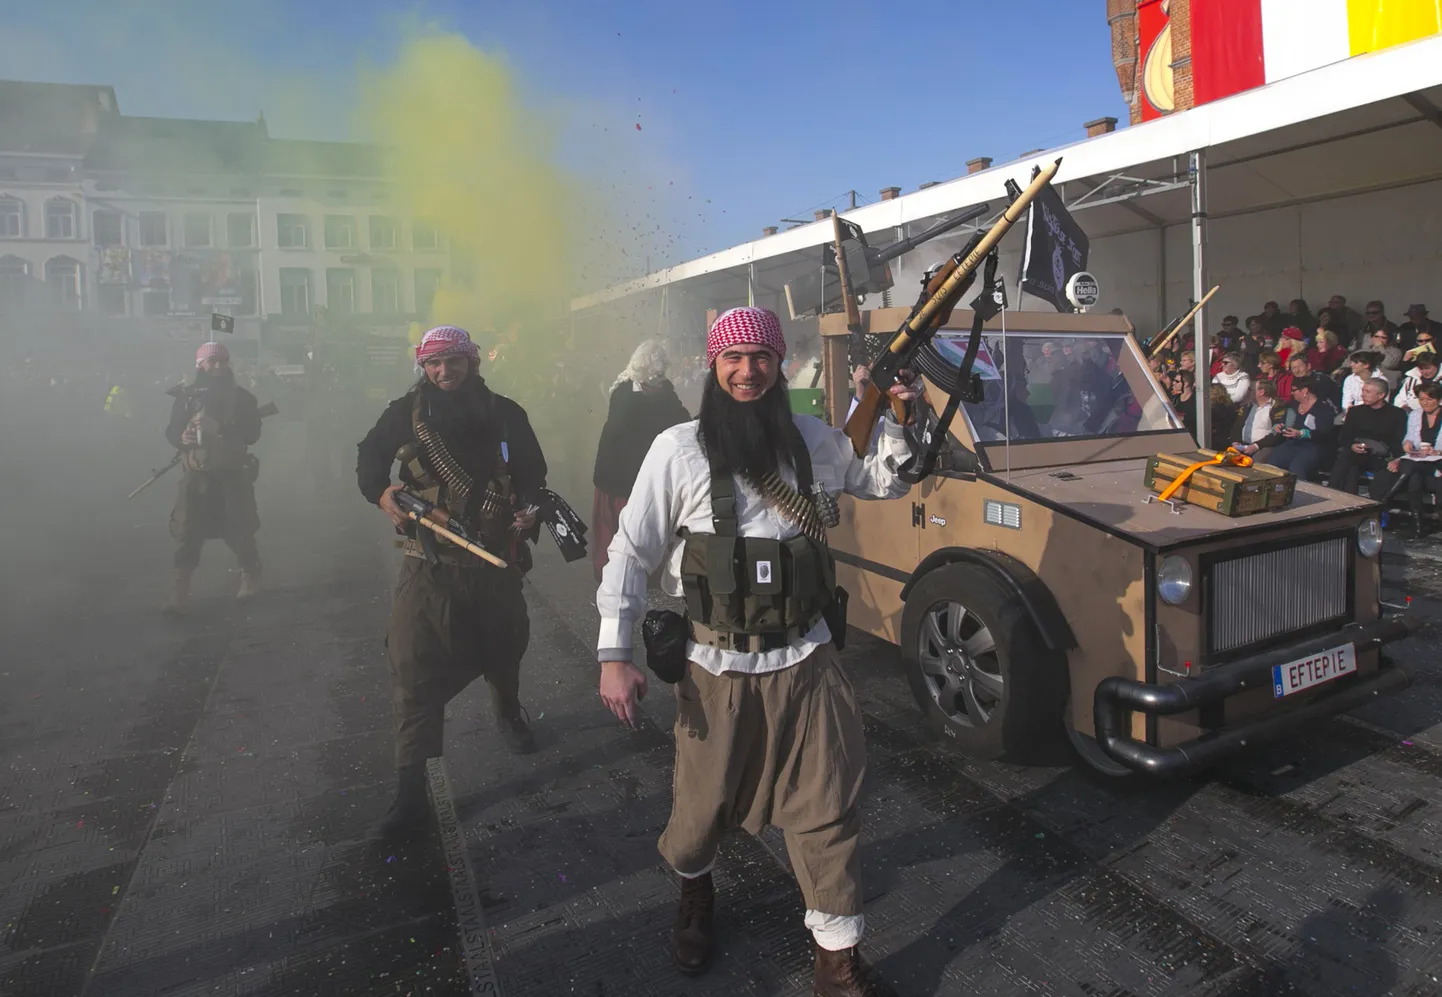 Revellers dressed as Islamic State militants take part in the 87th carnival parade of Aalst February 15, 2015. The Aalst Carnival, which is inscribed on the Representative List of the Intangible Cultural Heritage of Humanity, often shows informal groups presenting mocking interpretations of local and world events of the past year. REUTERS/Yves Herman (BELGIUM - Tags: SOCIETY)